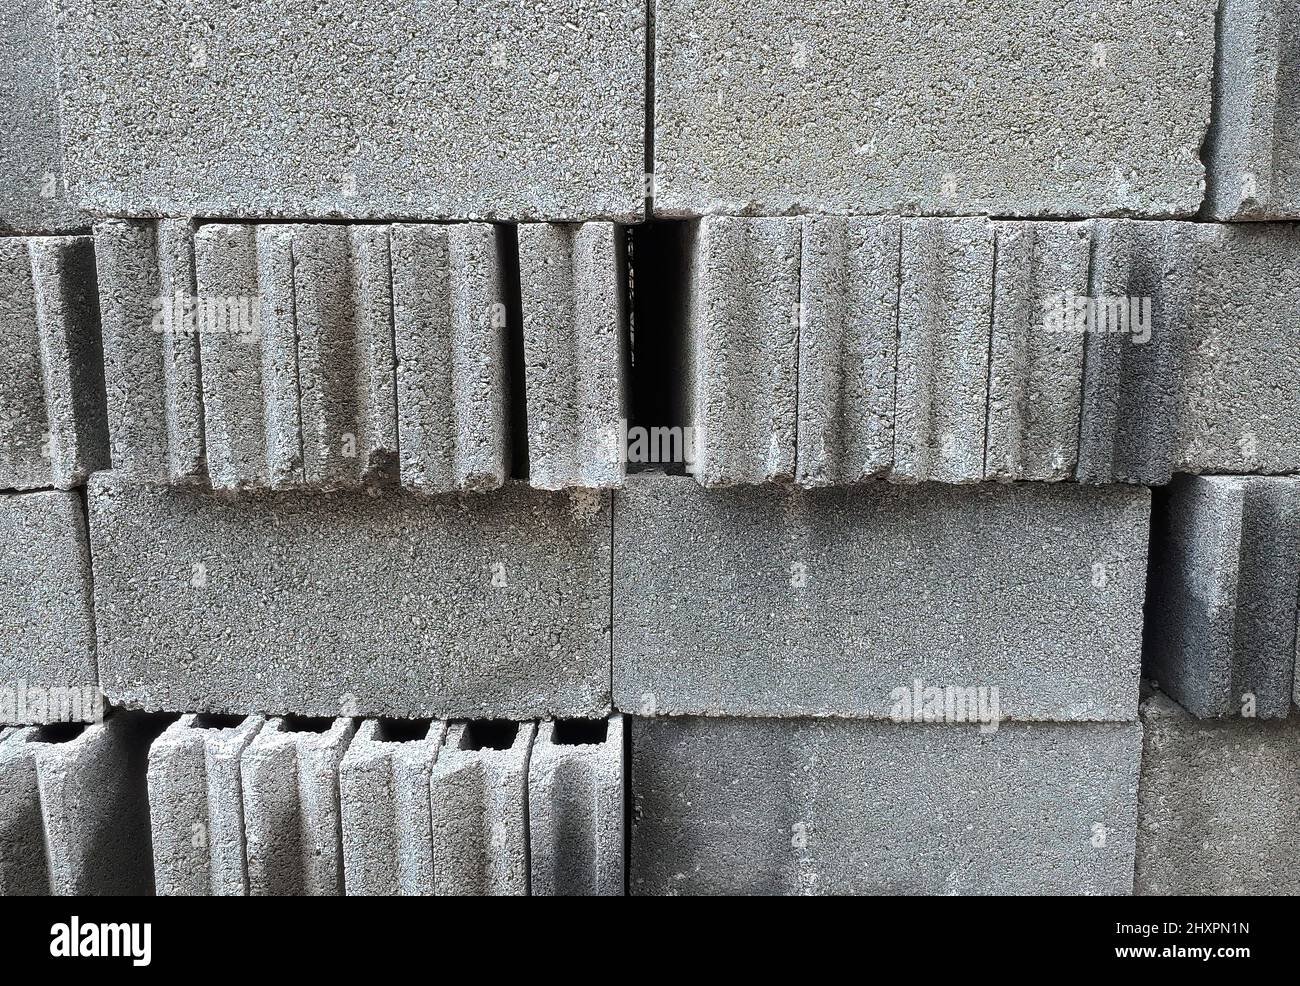 Close up construction material Concrete block stacked in grey color Stock Photo